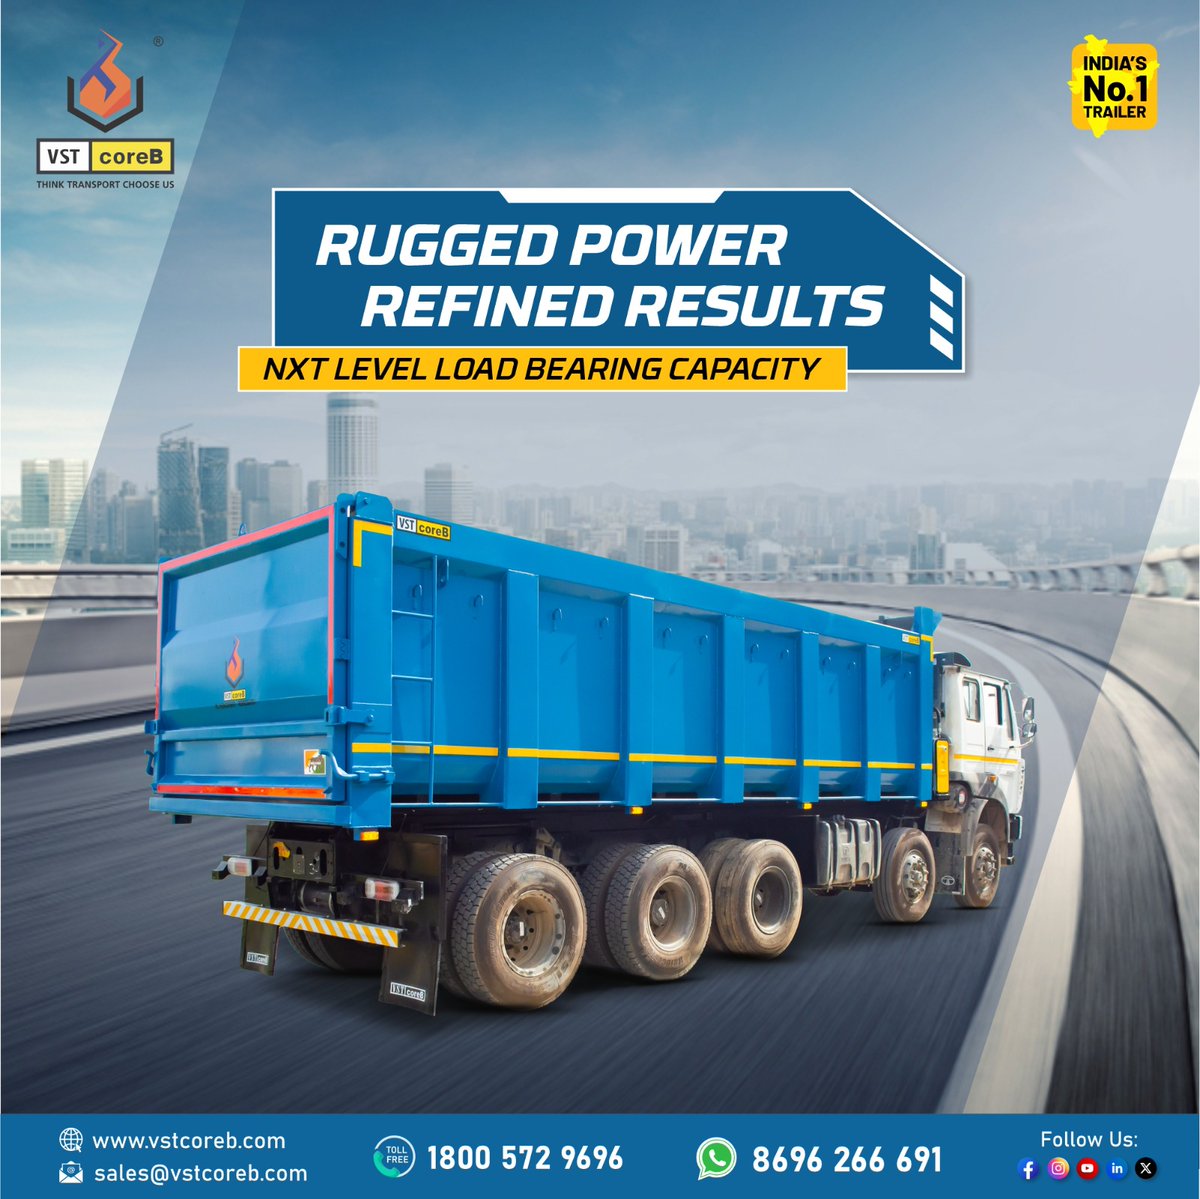 Unleash the power of rugged reliability with Tipper Rugged Power! Our heavy-duty trucks are built to conquer any challenge, ensuring refined results for your business. 
#vstcoreb #trailers #trailermanufacturer #tiptrailer #tippingtrailer #flatbedtrailer #skeletaltrailer